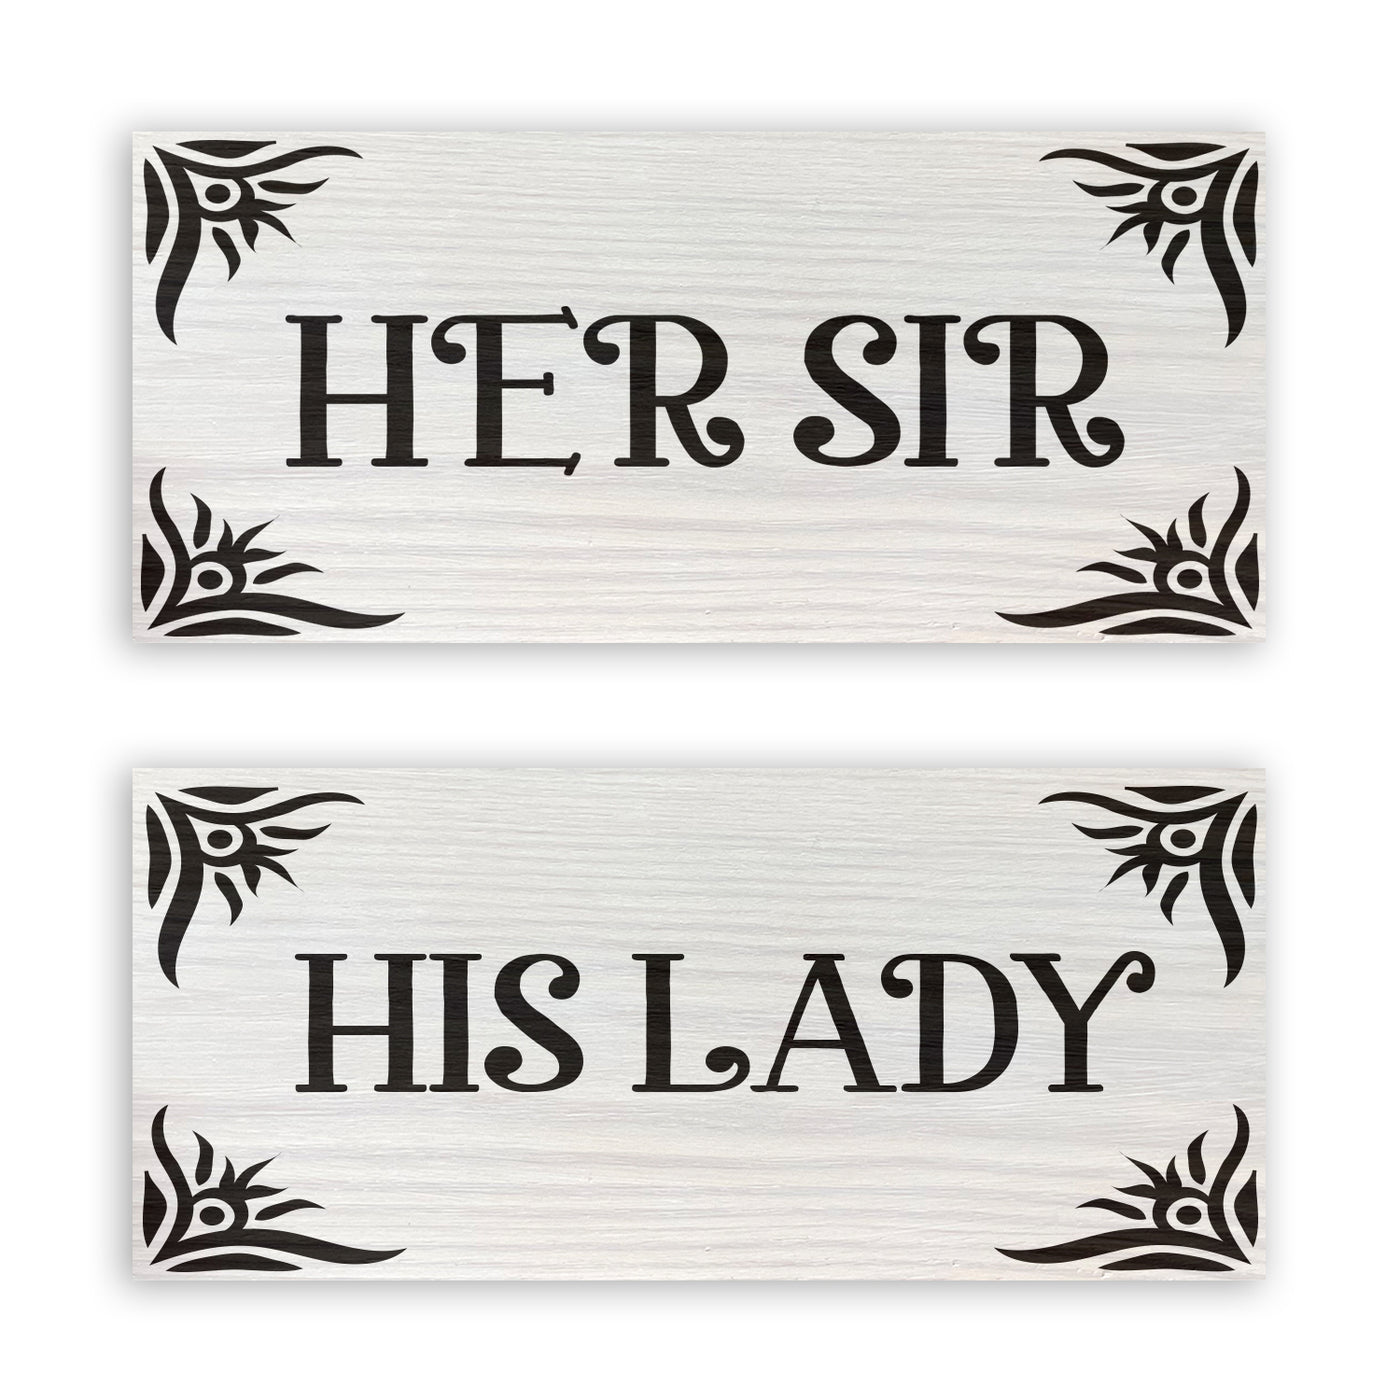 Her Sir and His Lady blocks